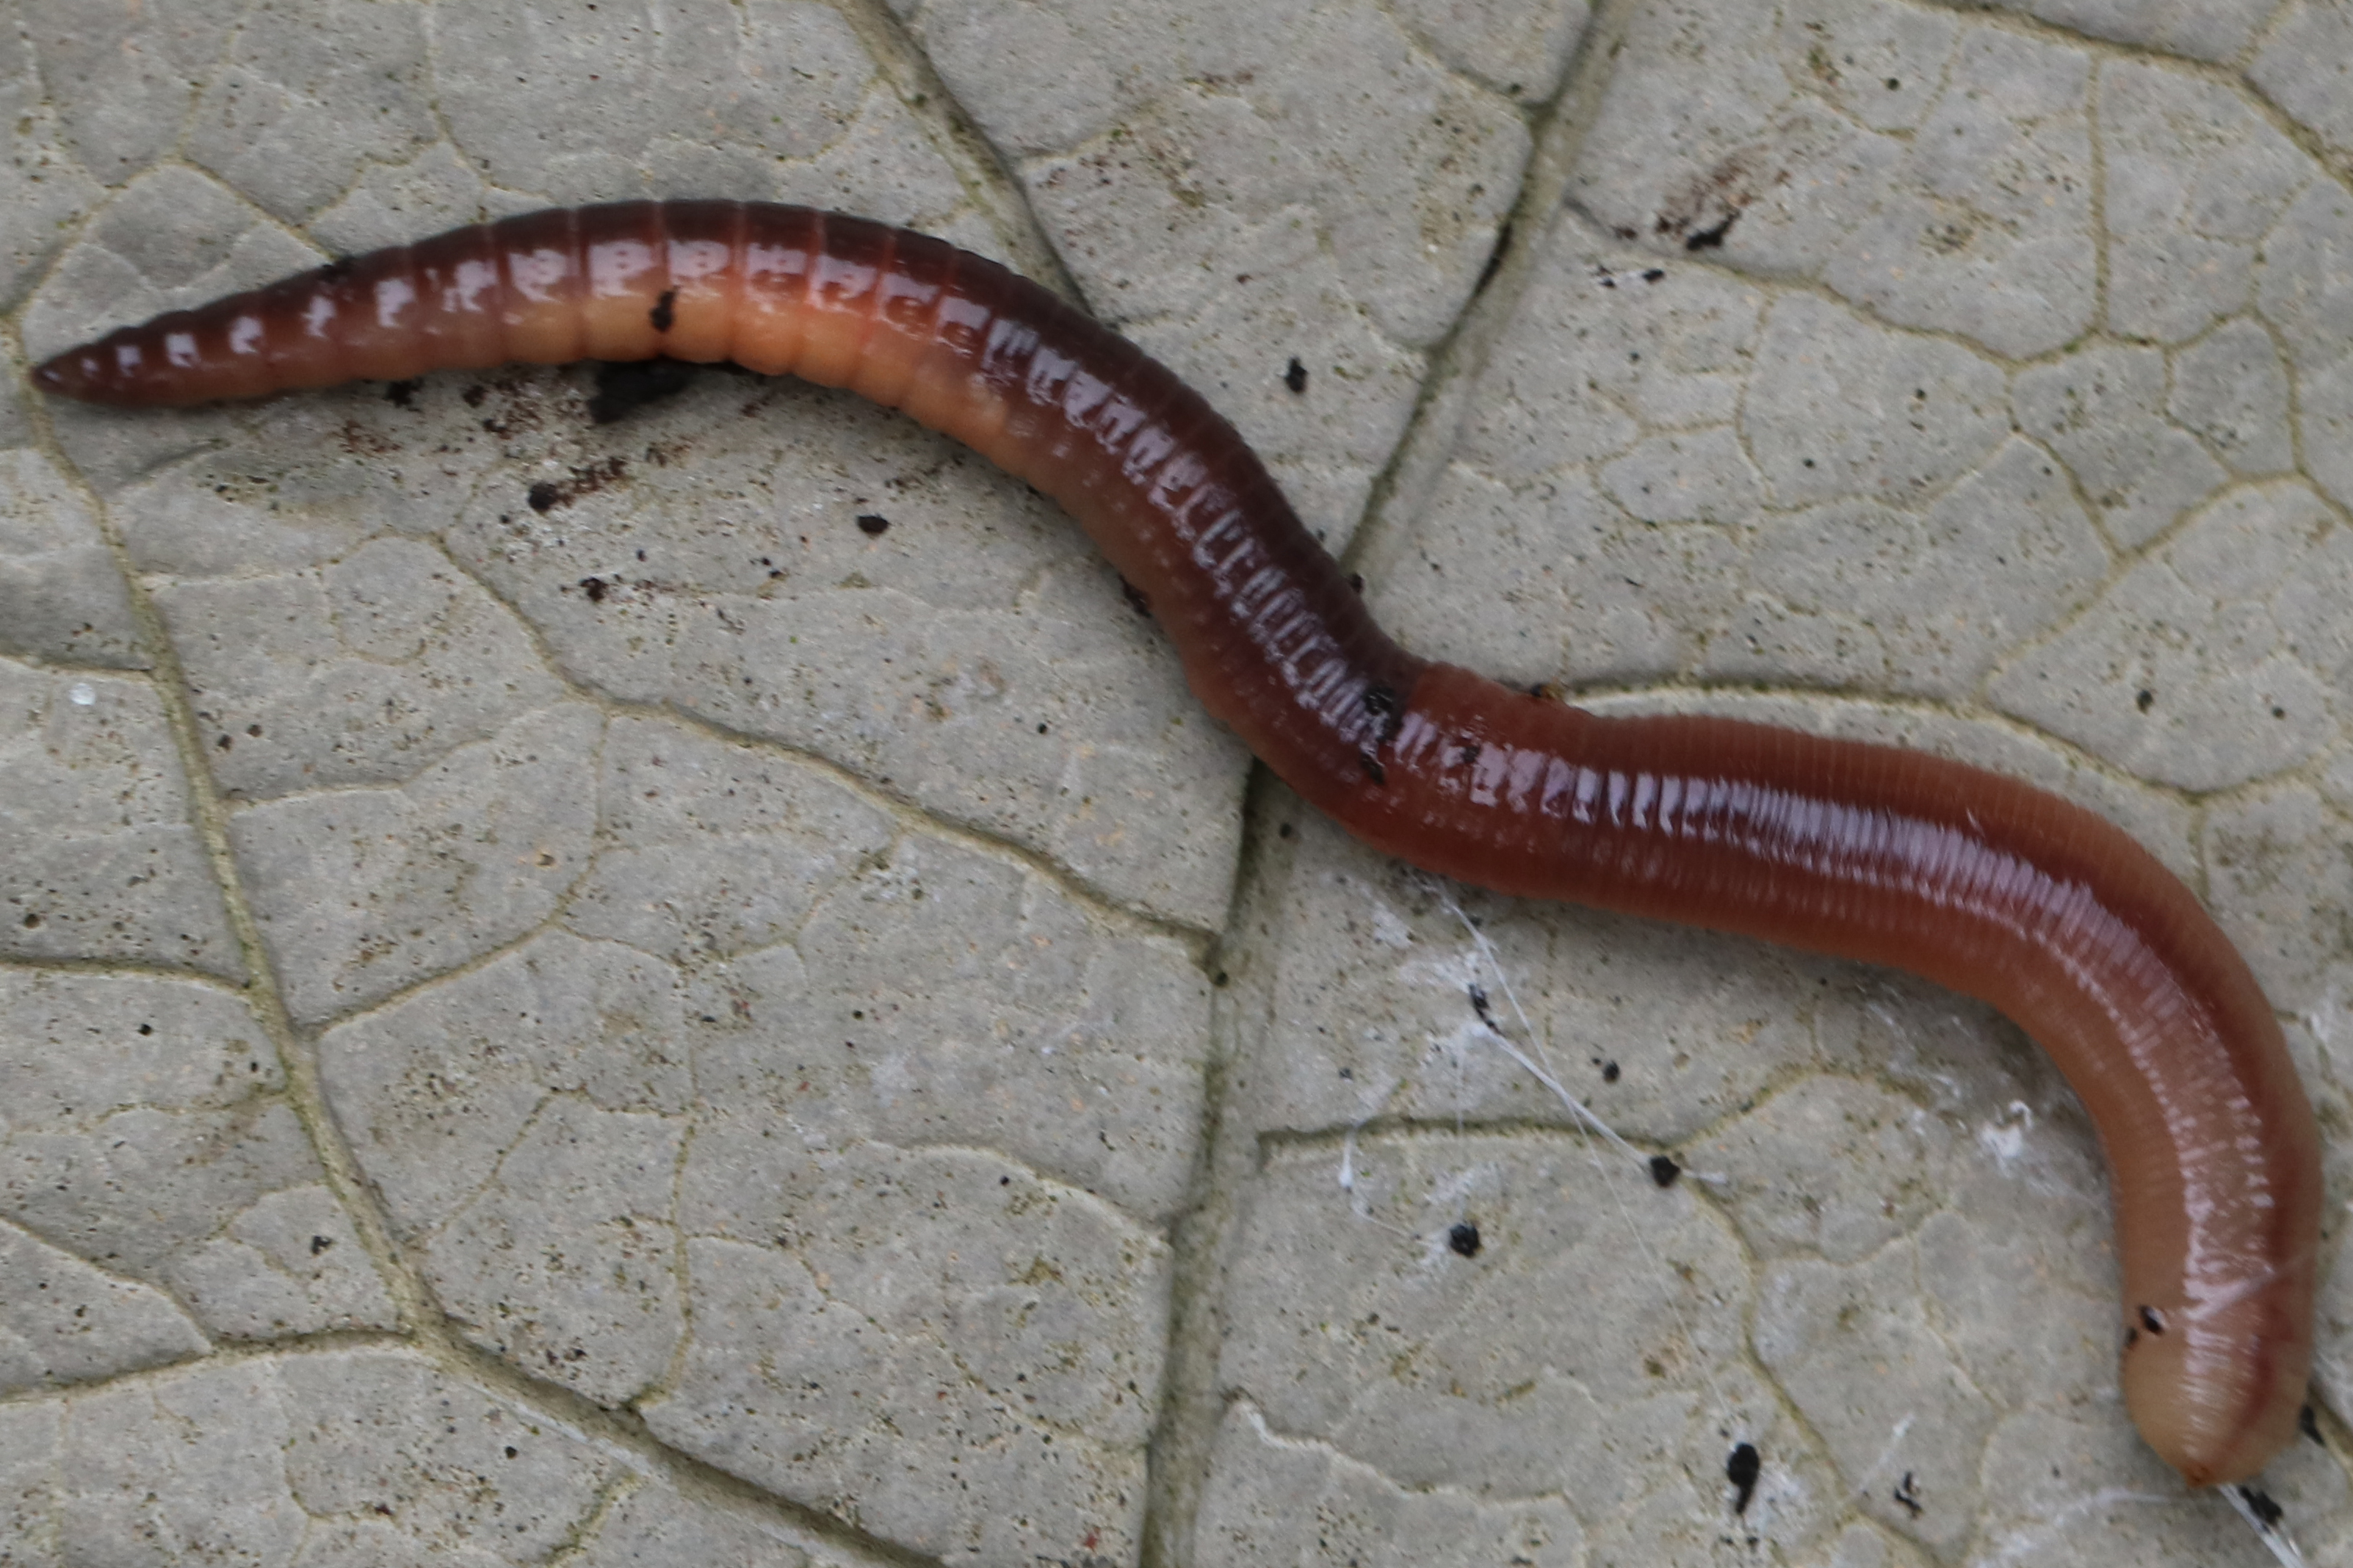 How to identify earthworms